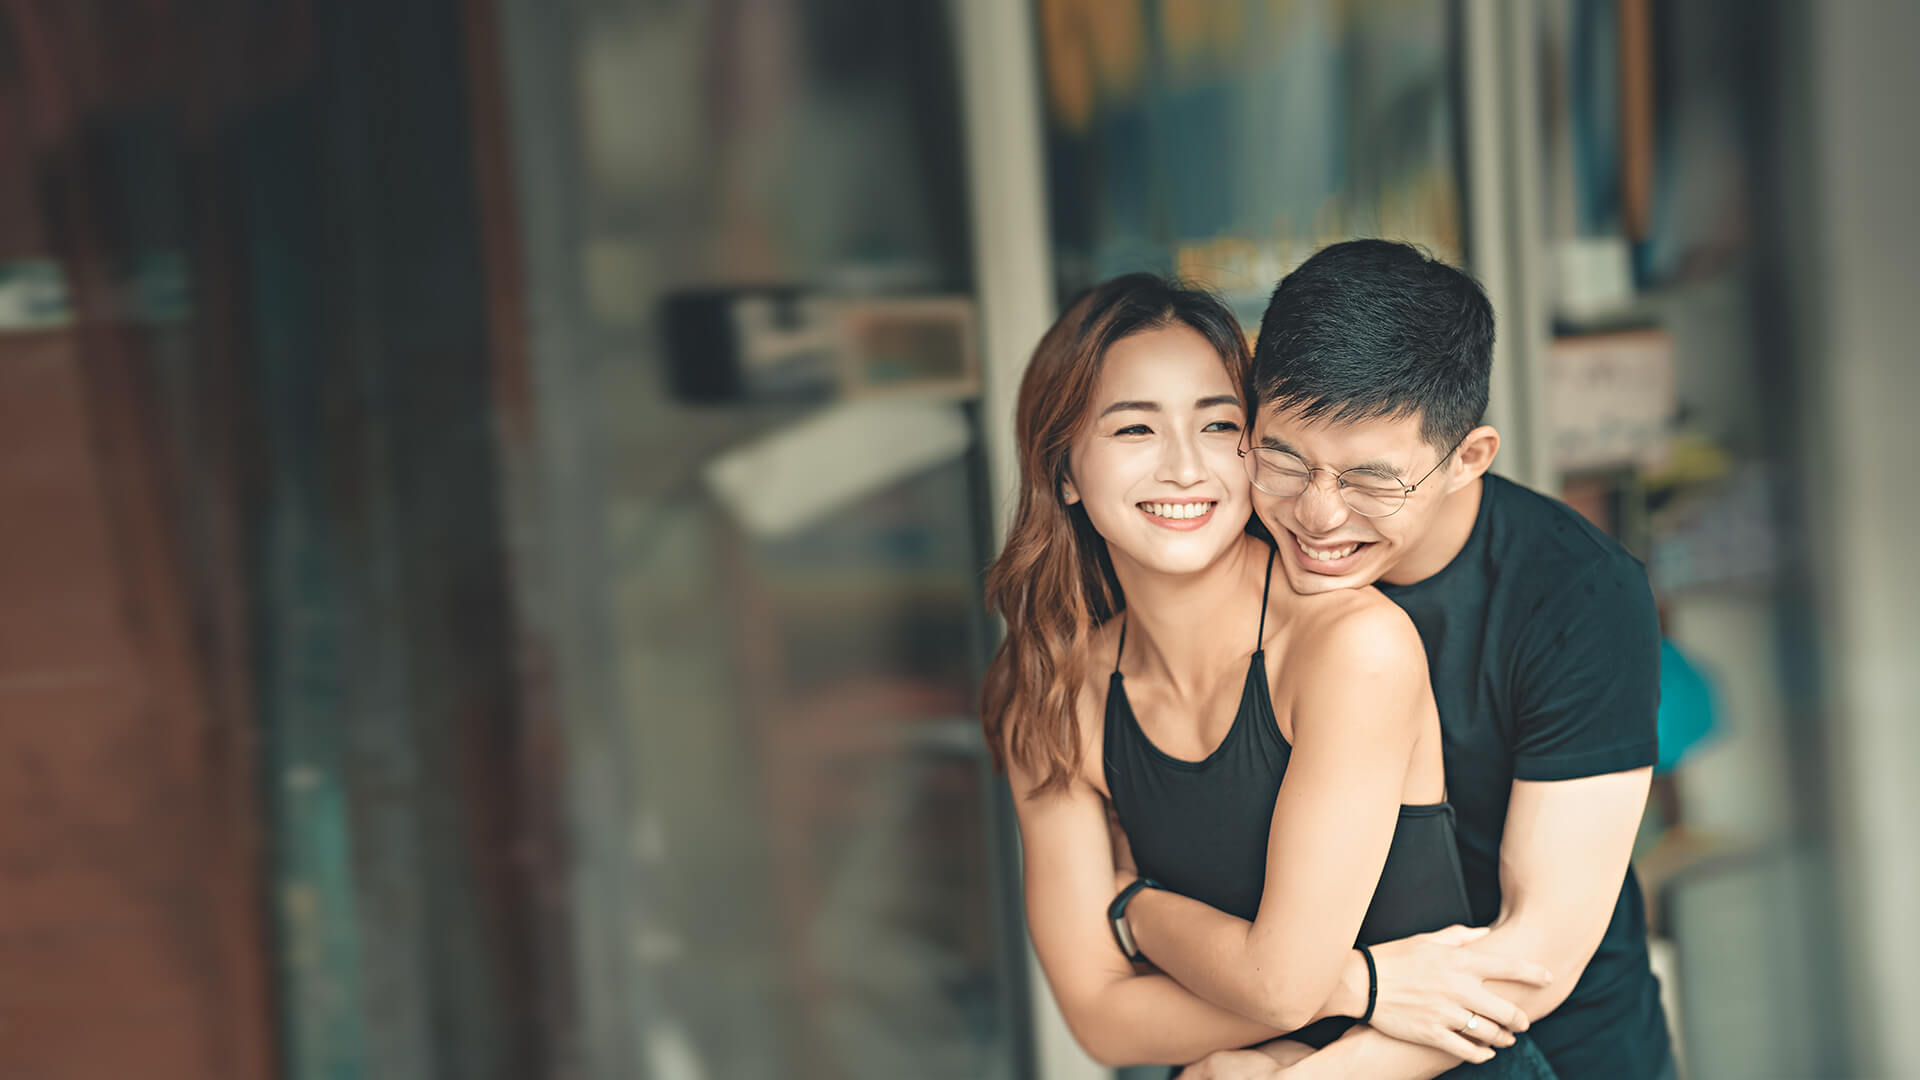 Asian Dating – Why you'll find a compatible partner with eharmony